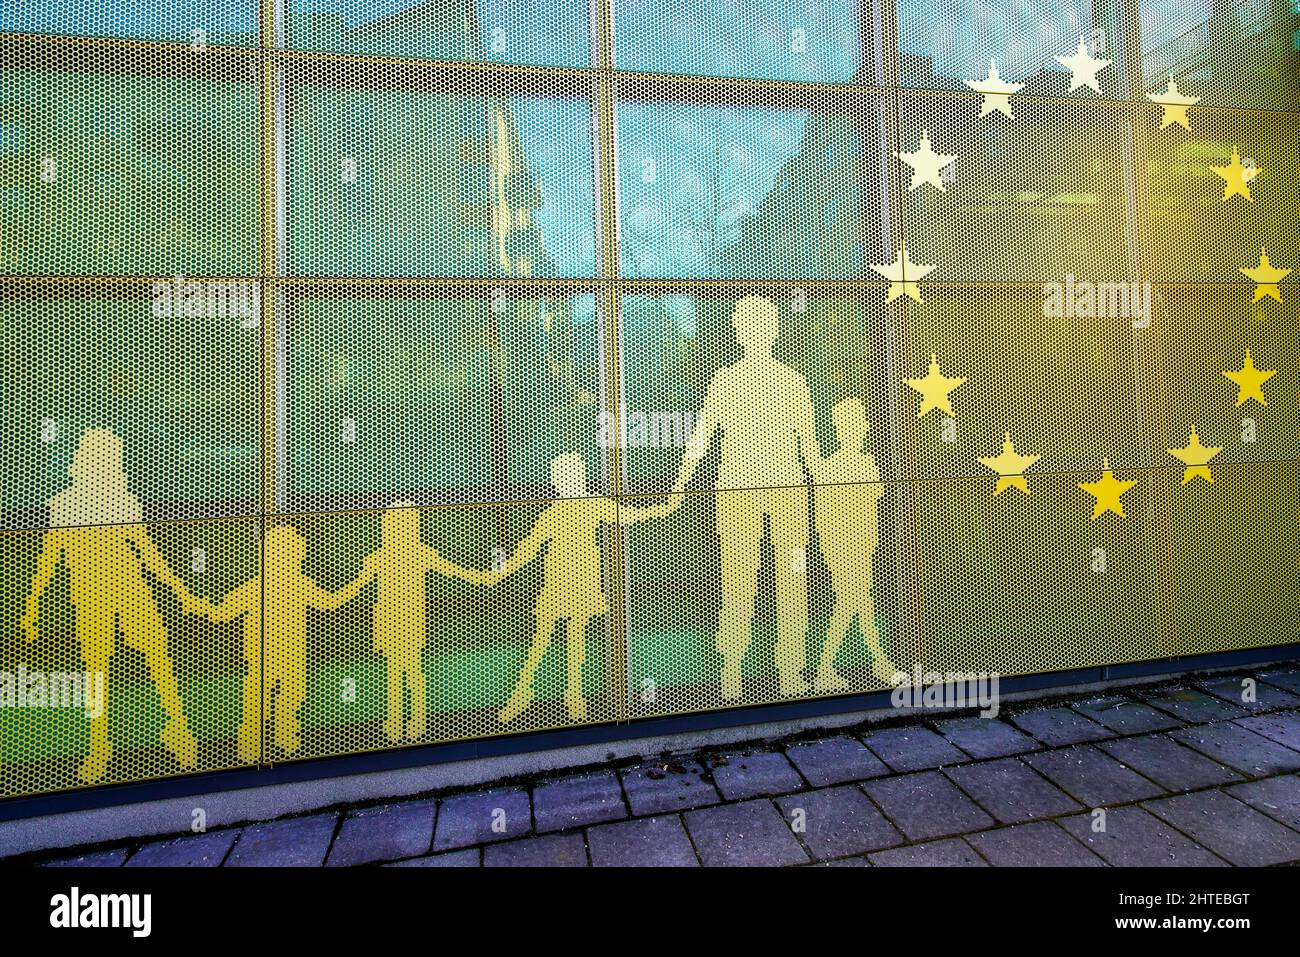 Facade decoration on European Centre for Disease Prevention and Control building, located in Solna/Frösunda, Stockholm City, Sweden. Stock Photo